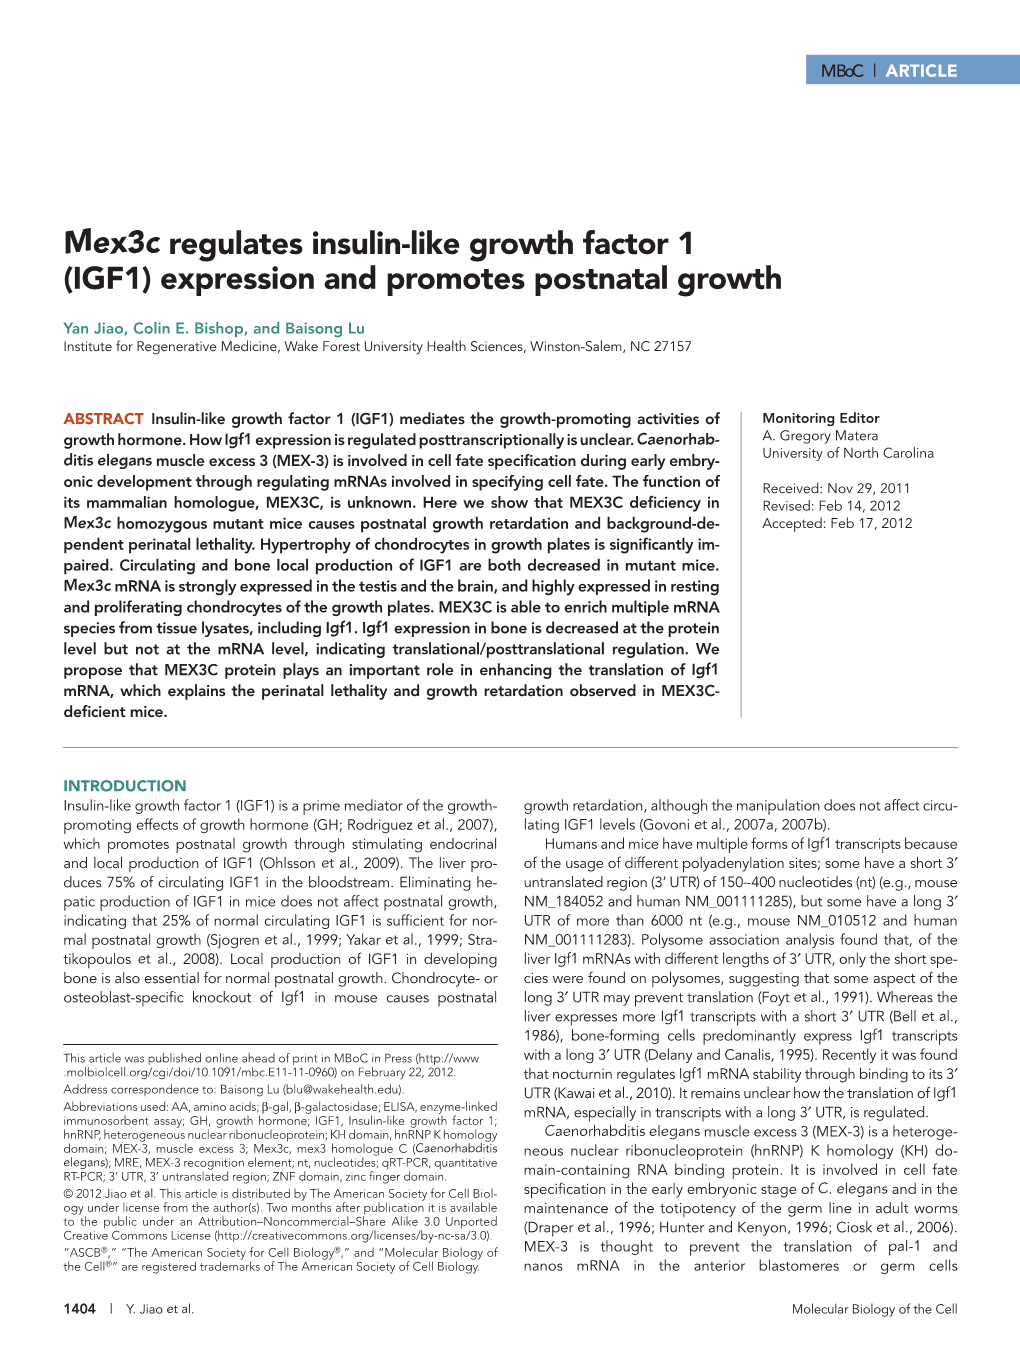 Mex3c Regulates Insulin-Like Growth Factor 1 (IGF1) Expression and Promotes Postnatal Growth